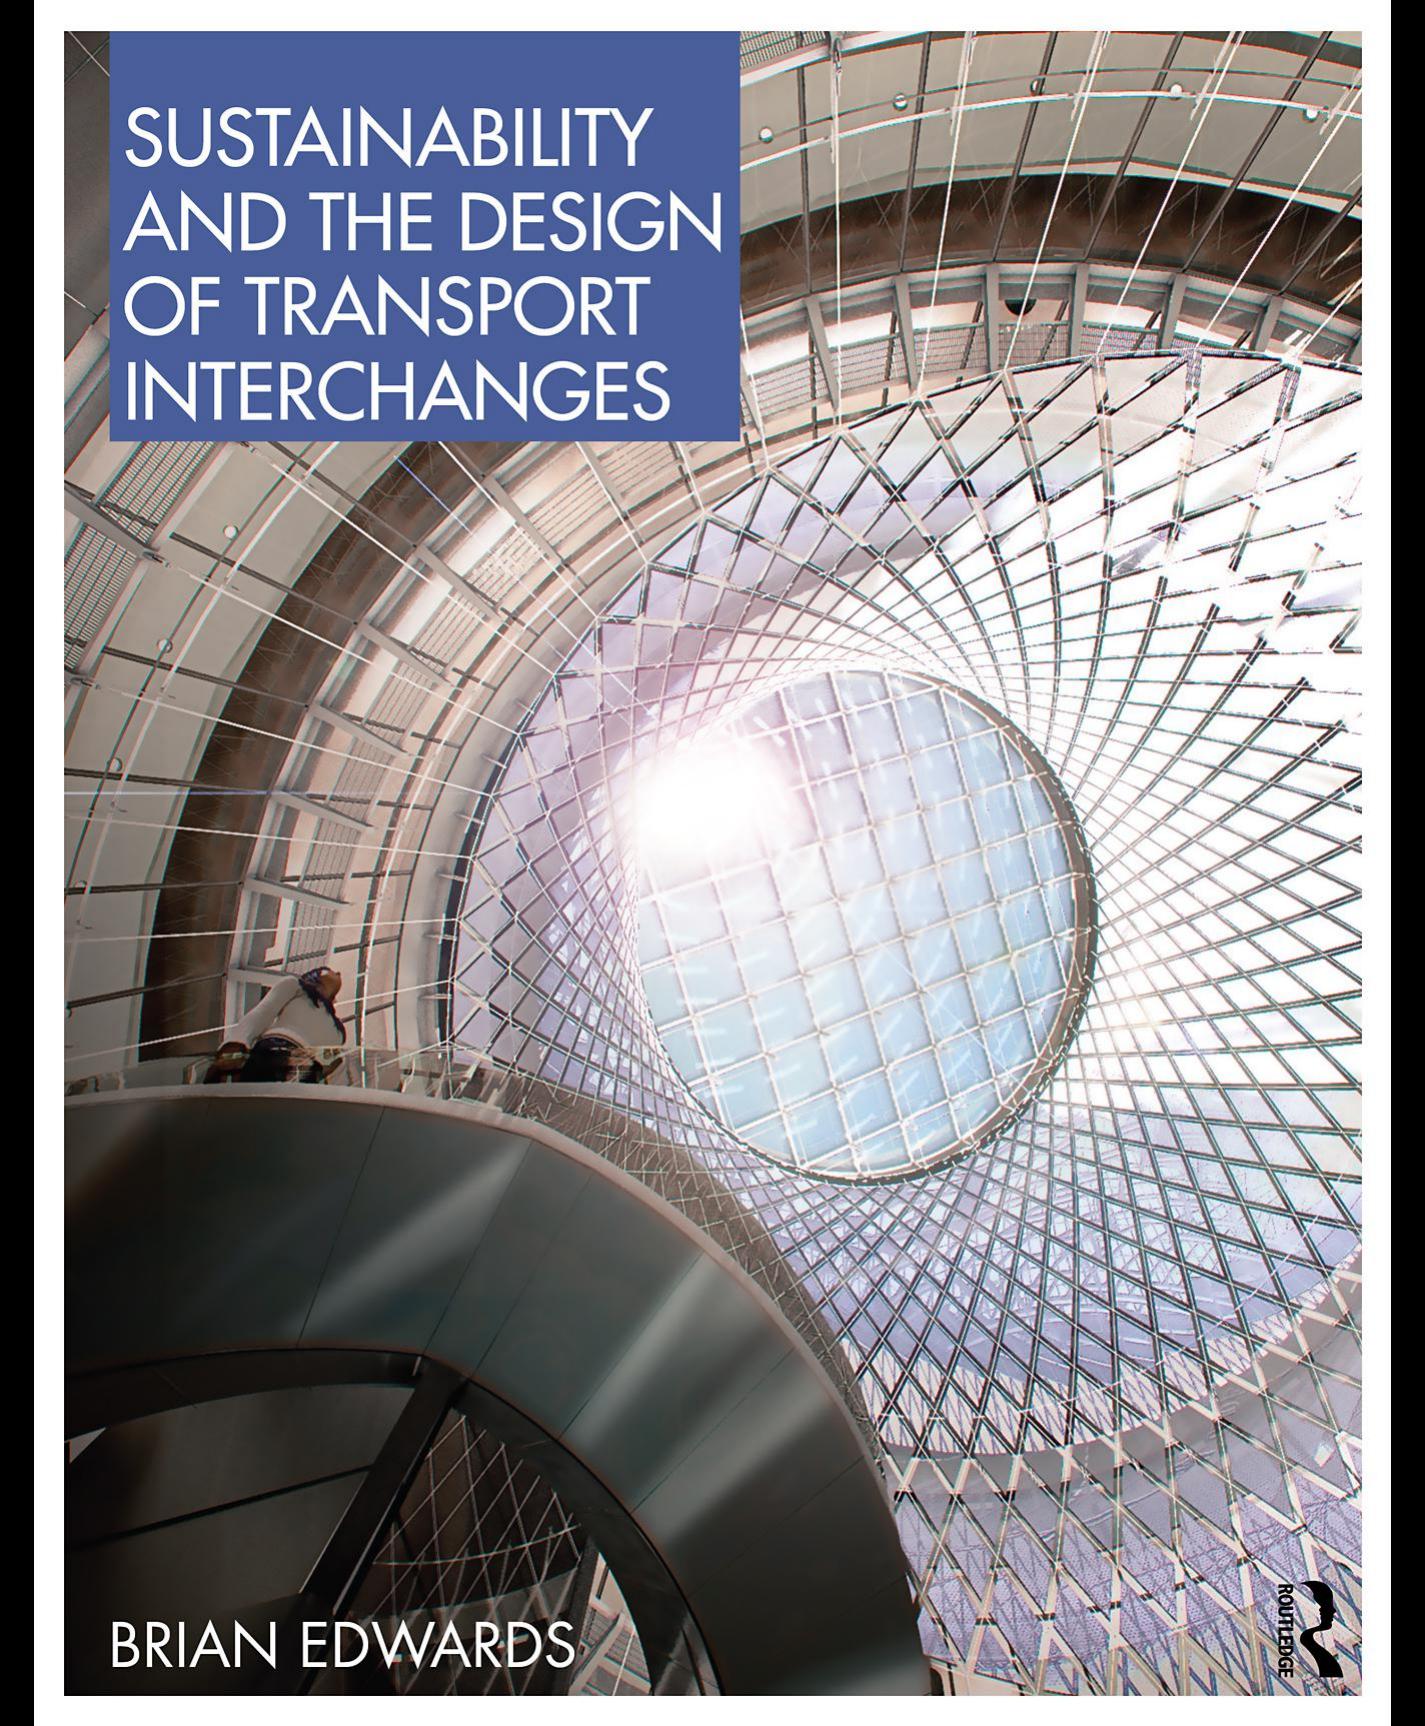 Sustainability and the Design of Transport Interchanges by Brian Edwards